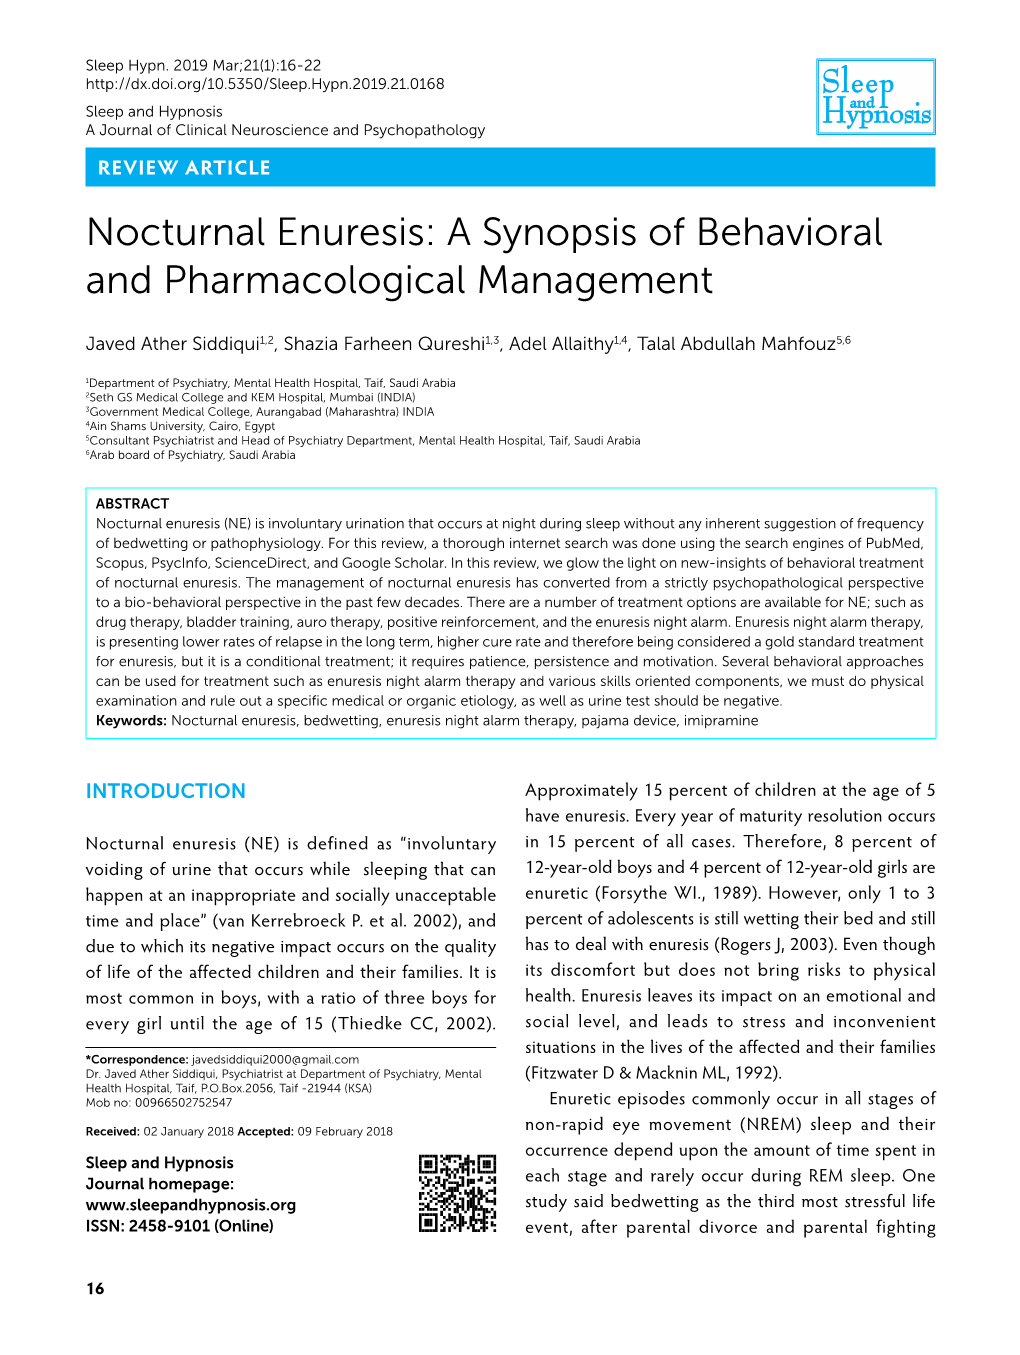 Nocturnal Enuresis: a Synopsis of Behavioral and Pharmacological Management